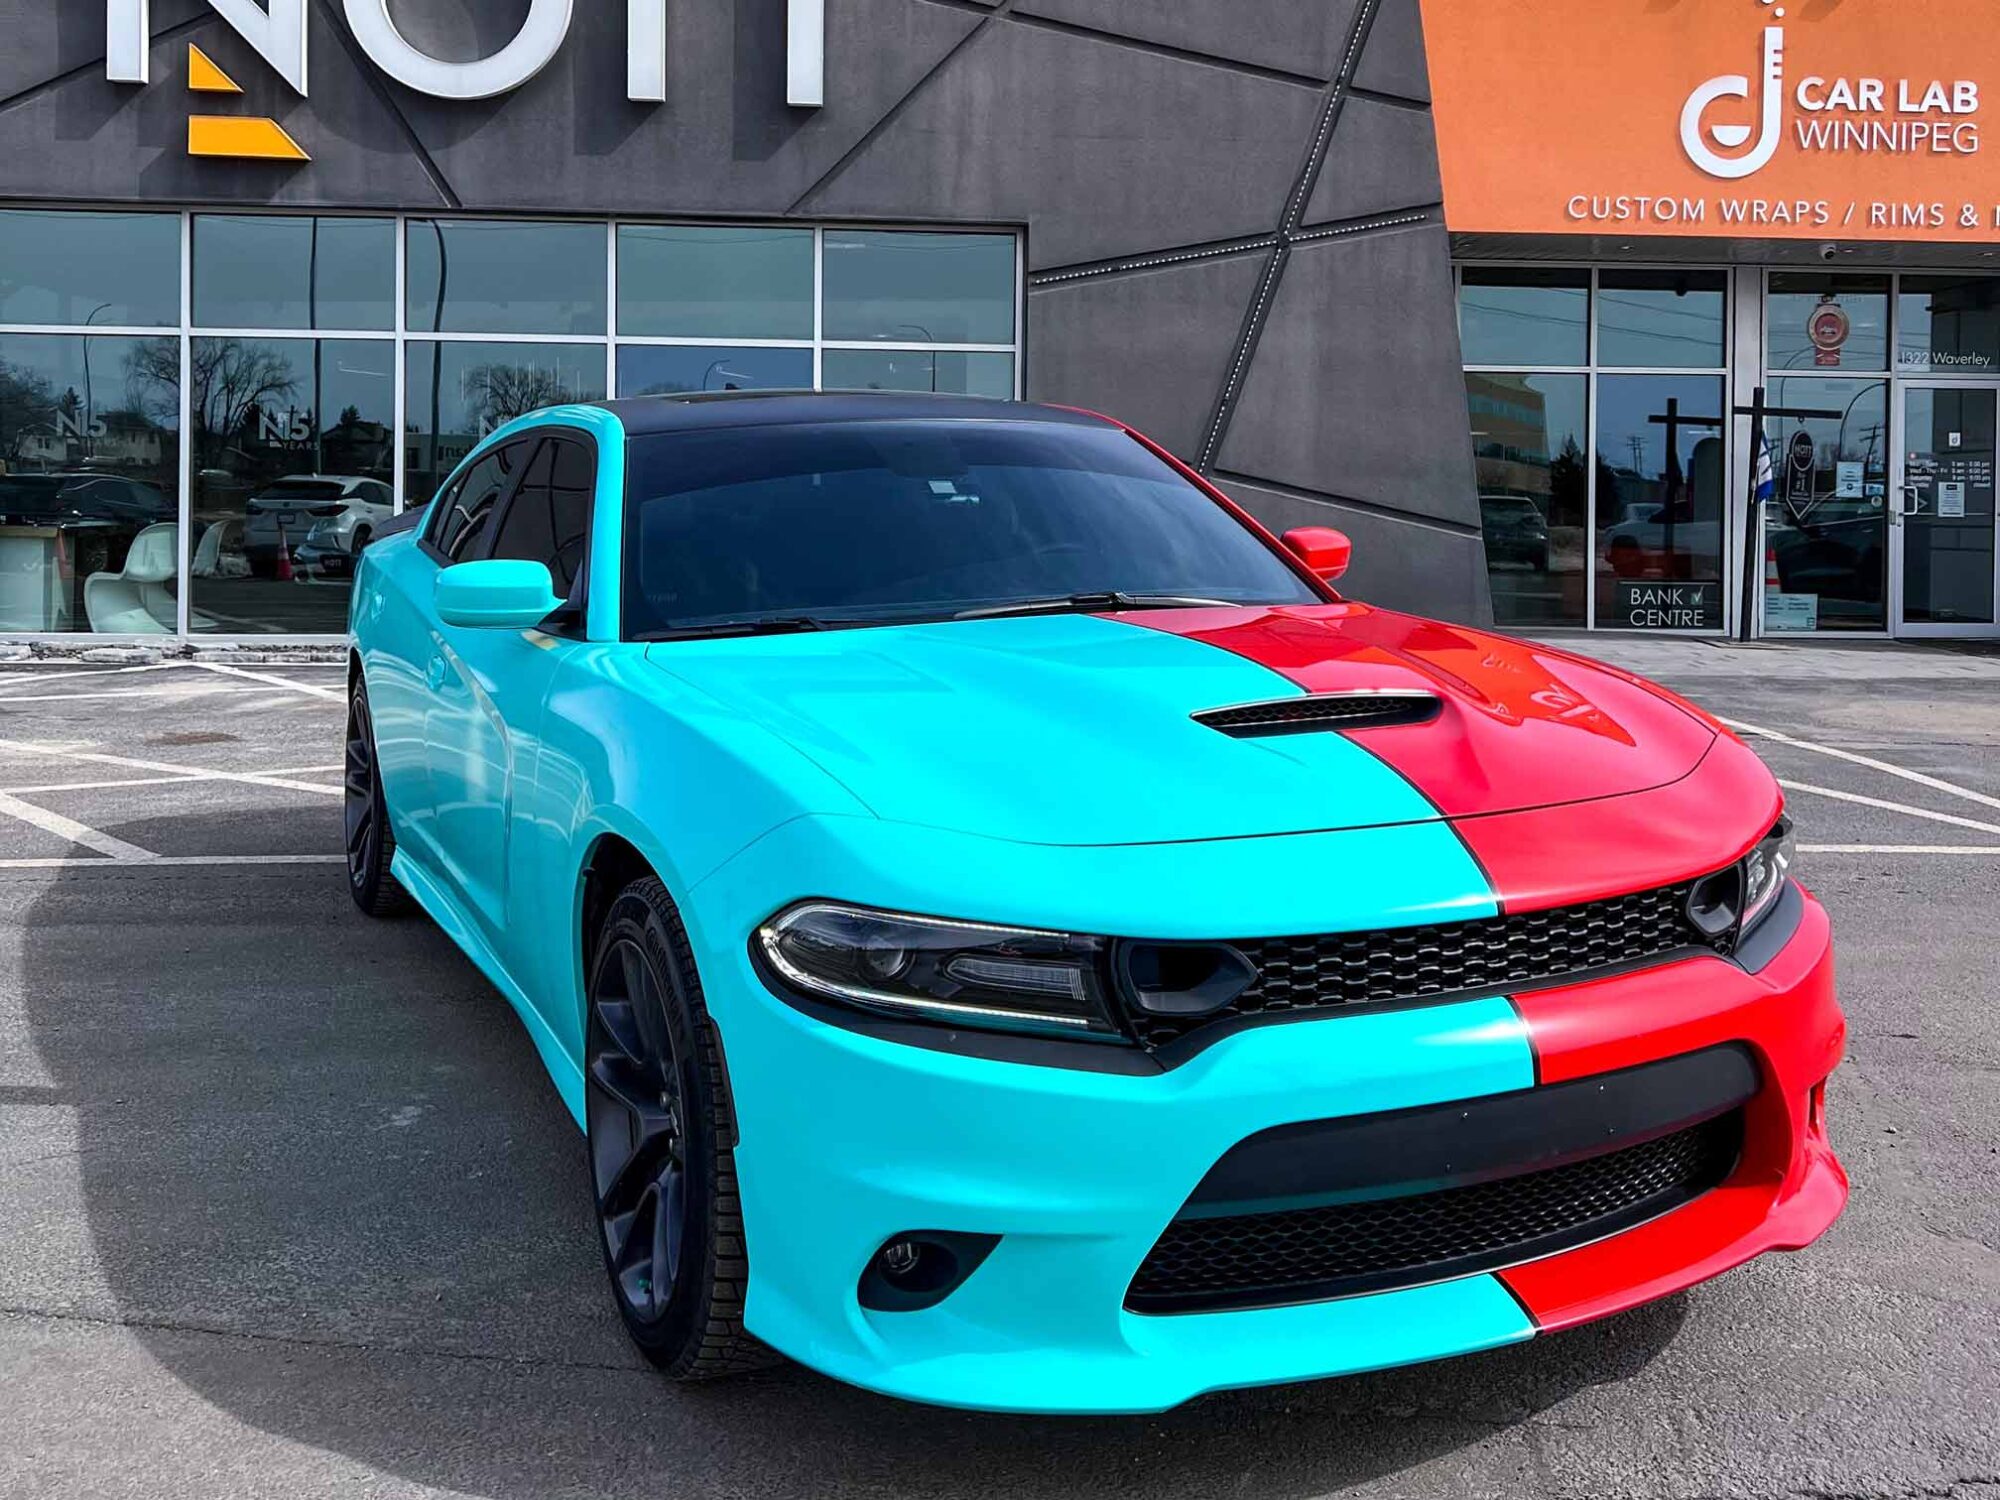 Dodge, Dodge wrap Business Graphics, Wrap Price, Winnipeg Wrap Price, Wrap Prices Winnipeg, Best Vinyl Wraps Winnipeg, Winnipegs Best Wraps, Wrap, Wrapped, Wrapping, Wrappers